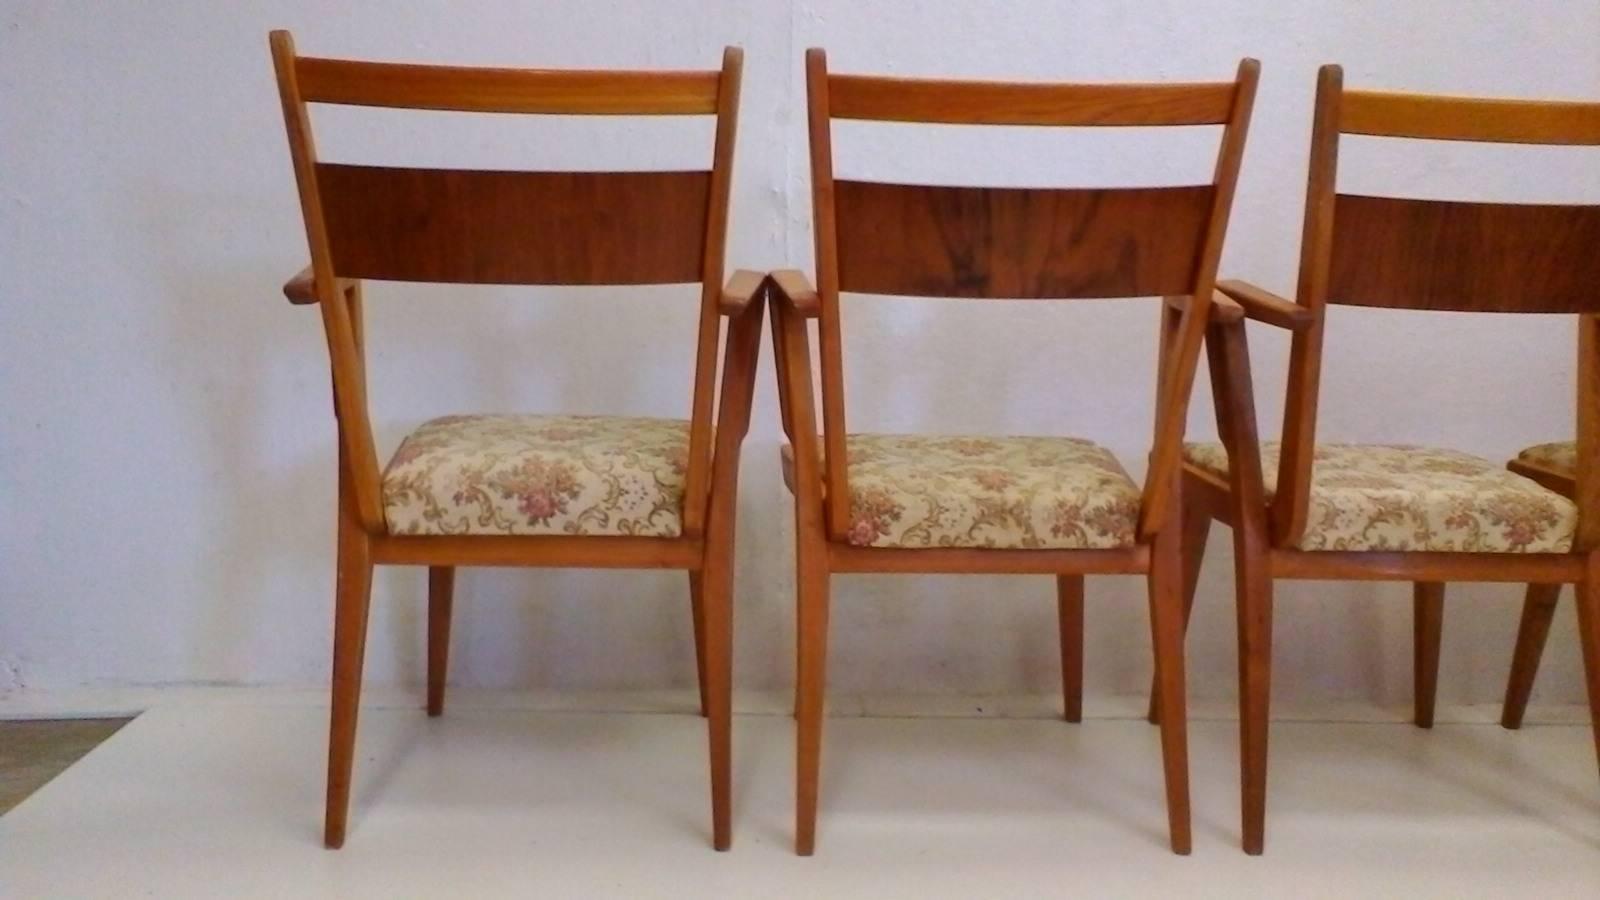 Set of Four Wooden Chairs JI-350 with New Upholstery, 1965 For Sale 1